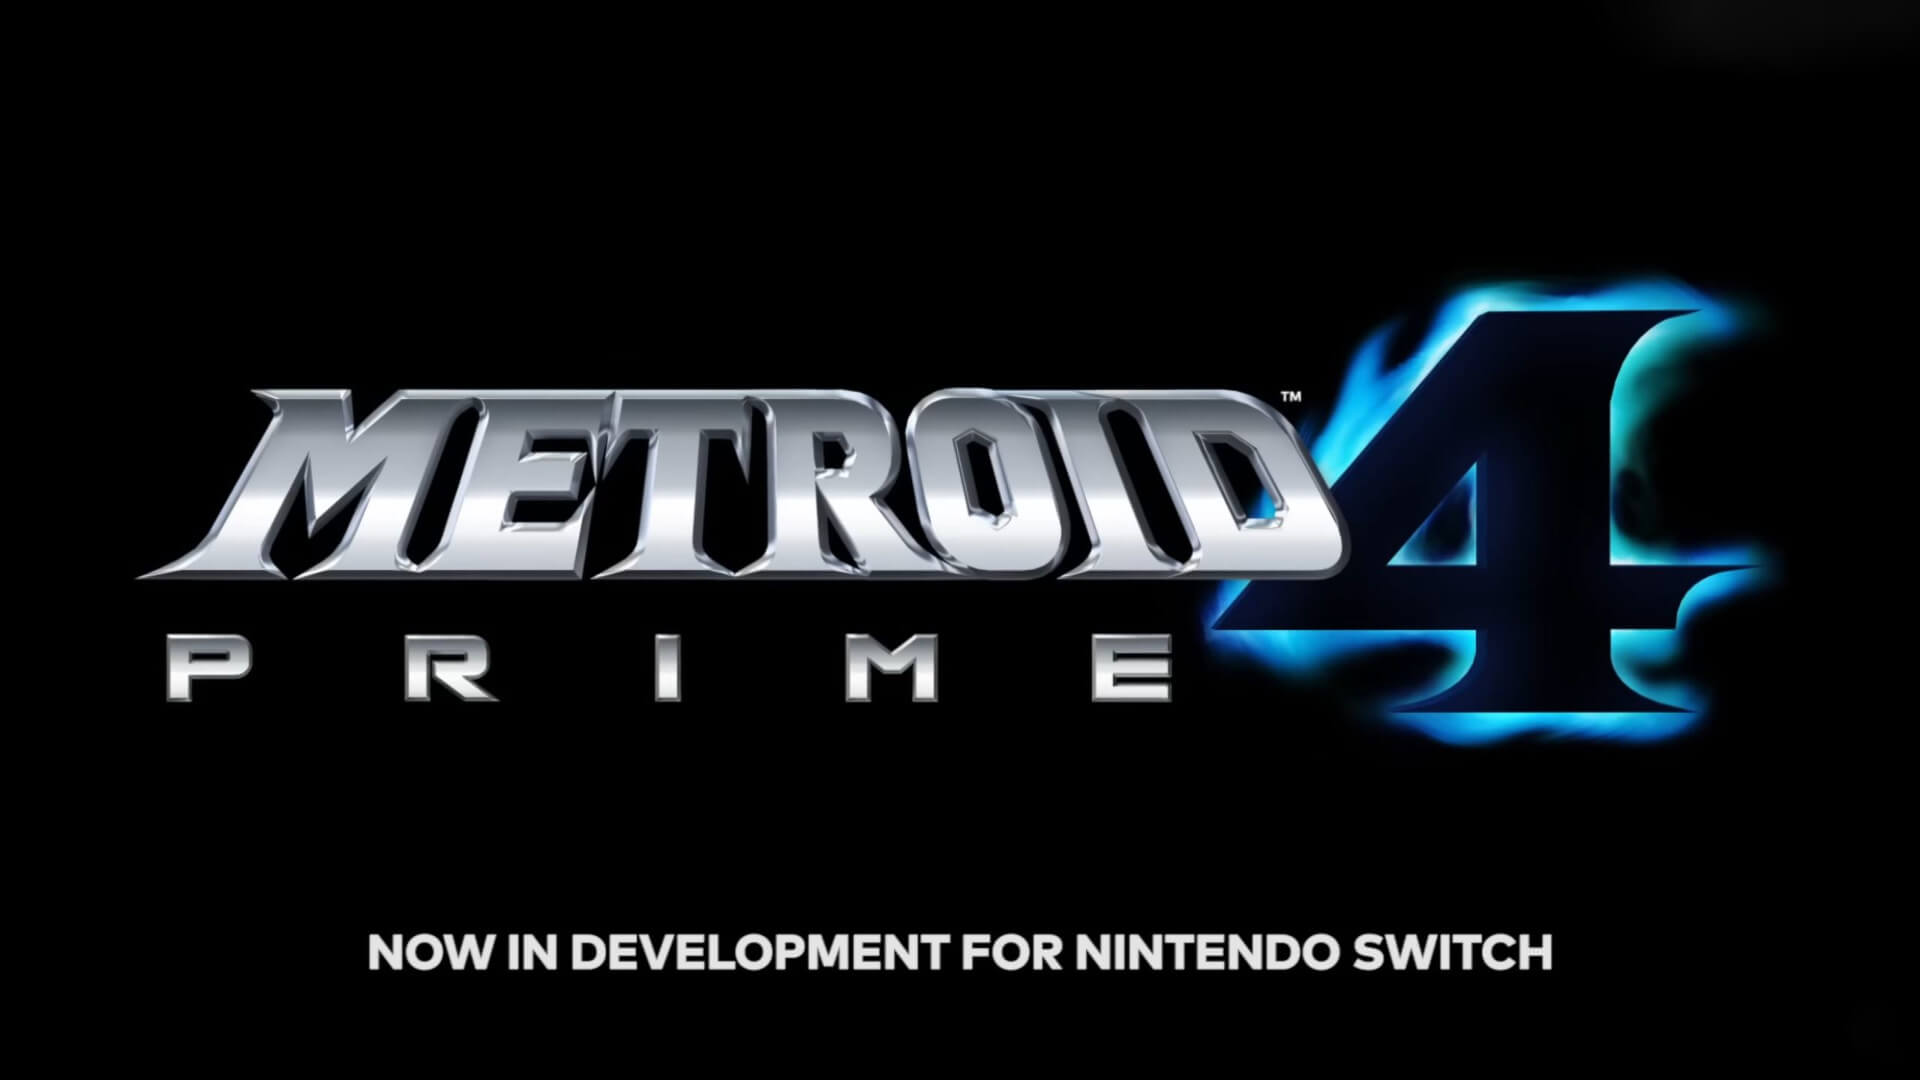 A screen that says "Metroid Prime 4 in development for Nintendo Switch"